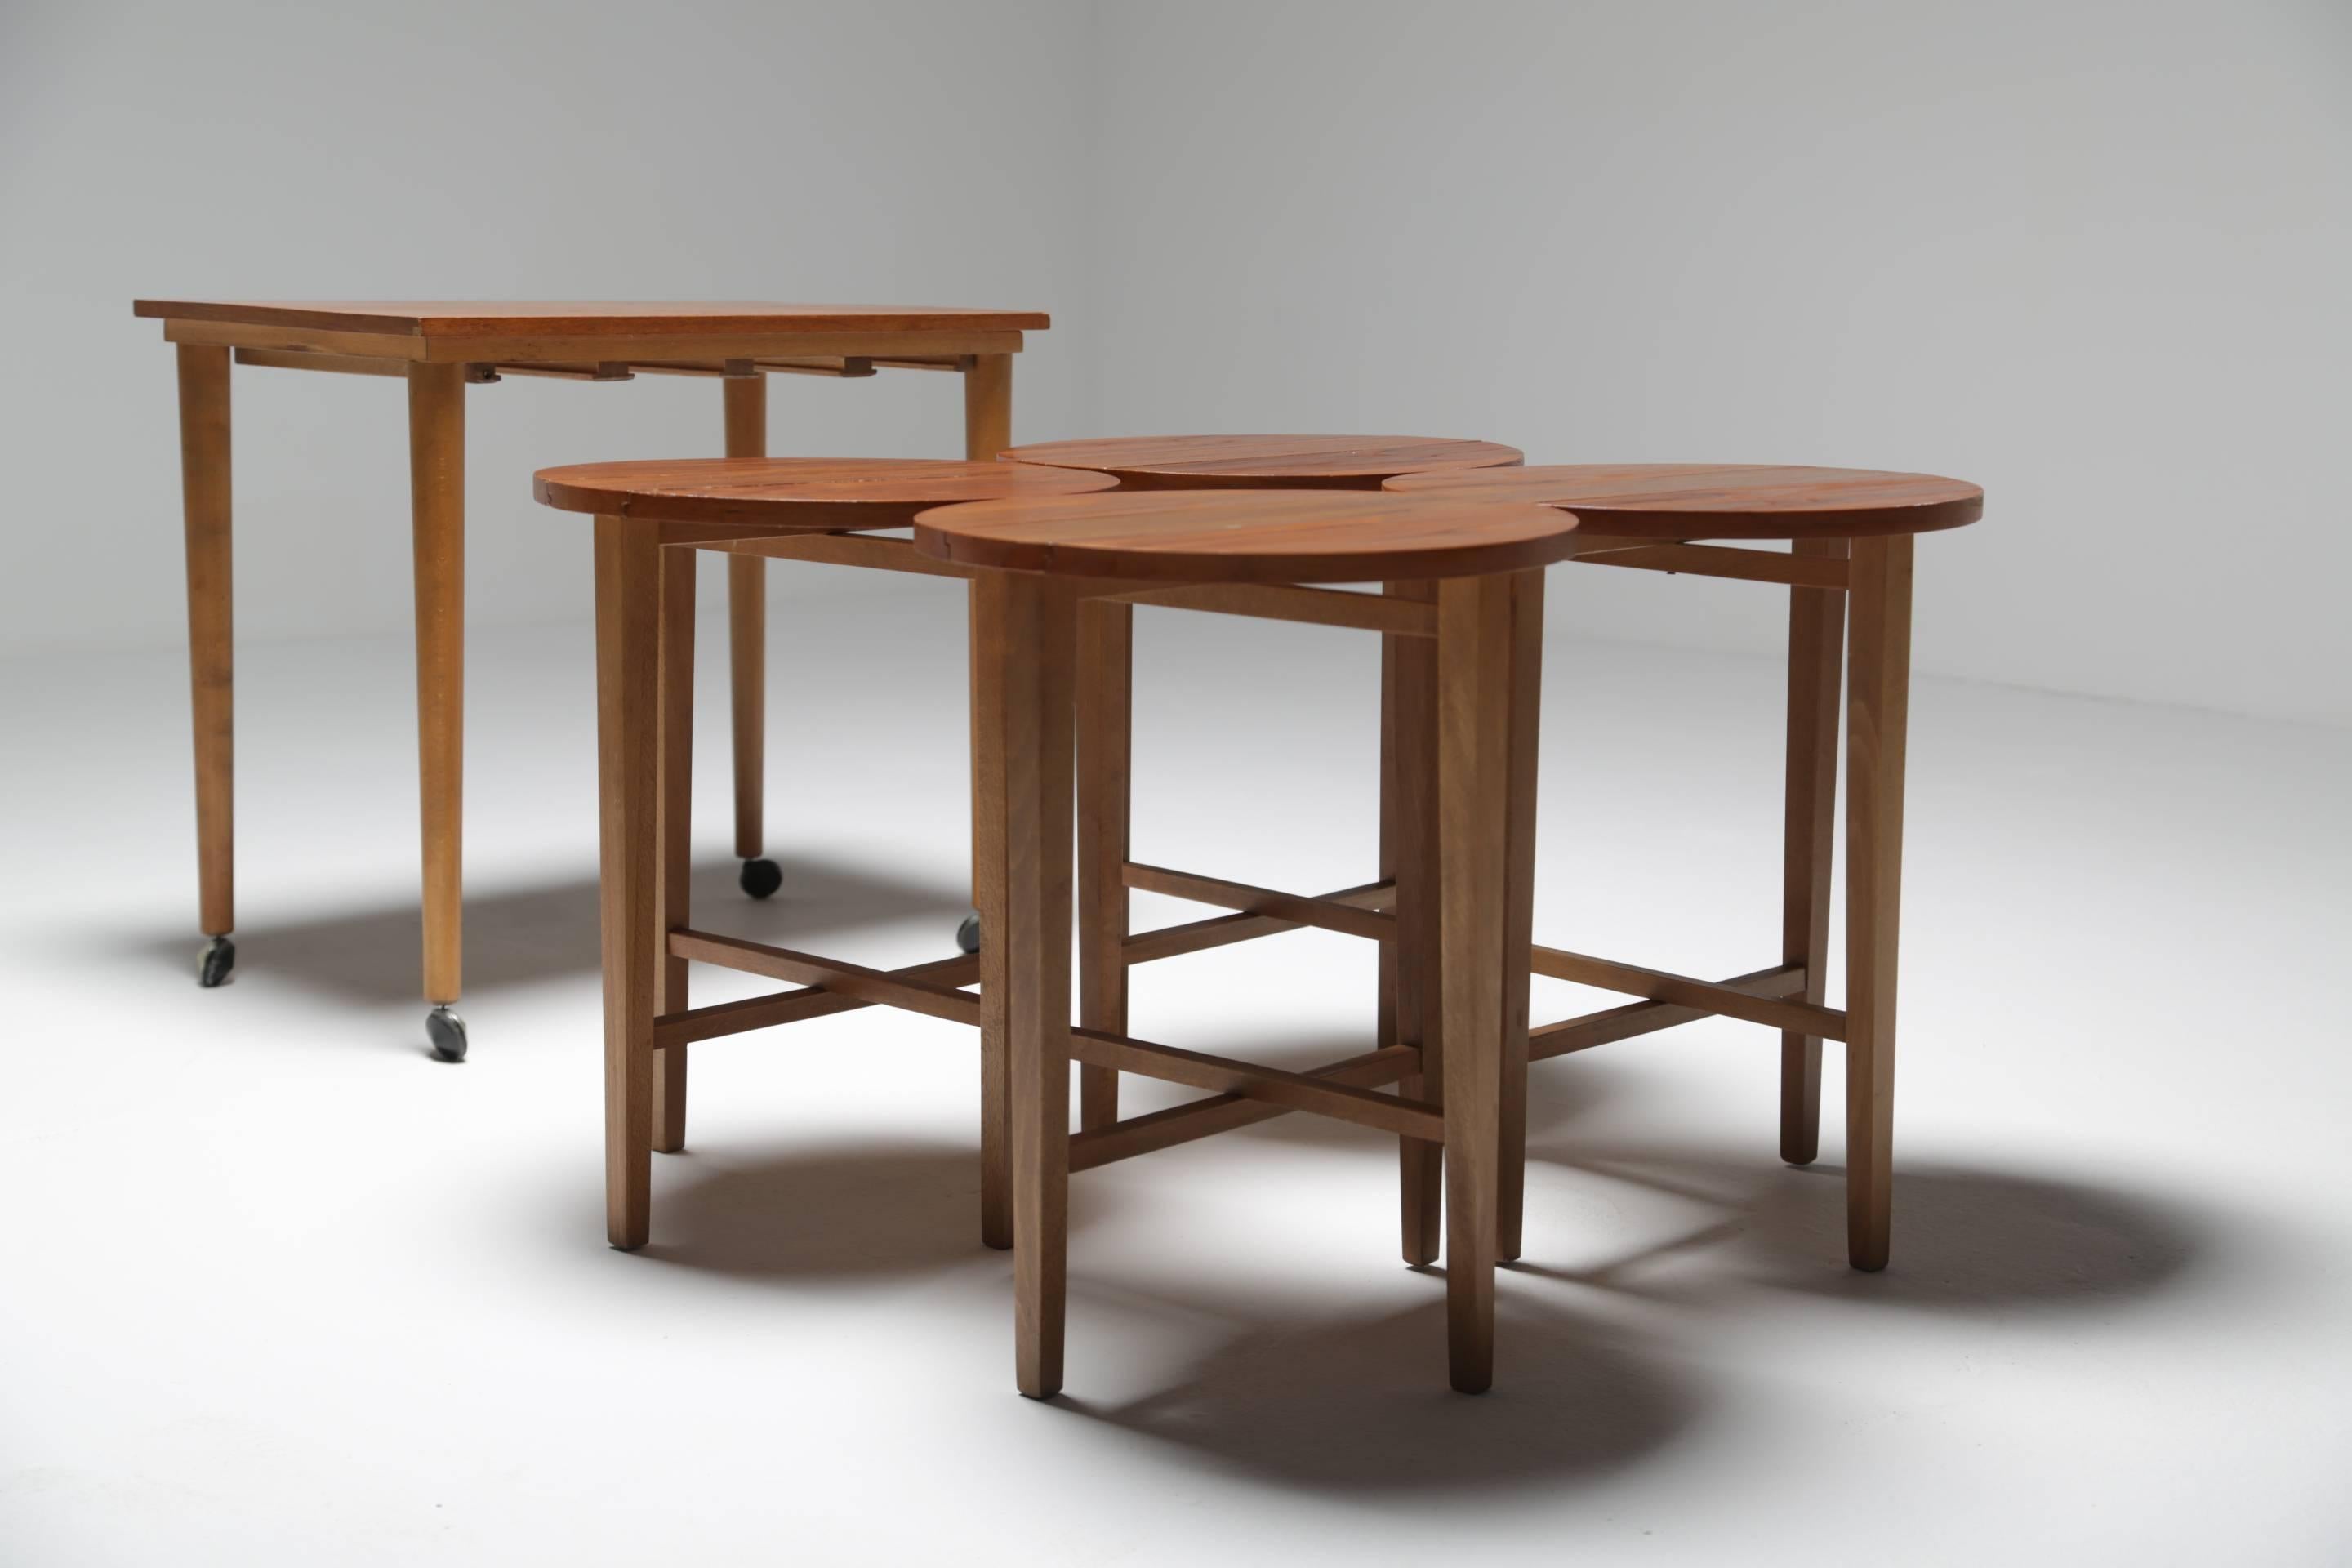 Joinery Midcentury Teak Quartetto Nesting Tables Attribute to Poul Hundevad